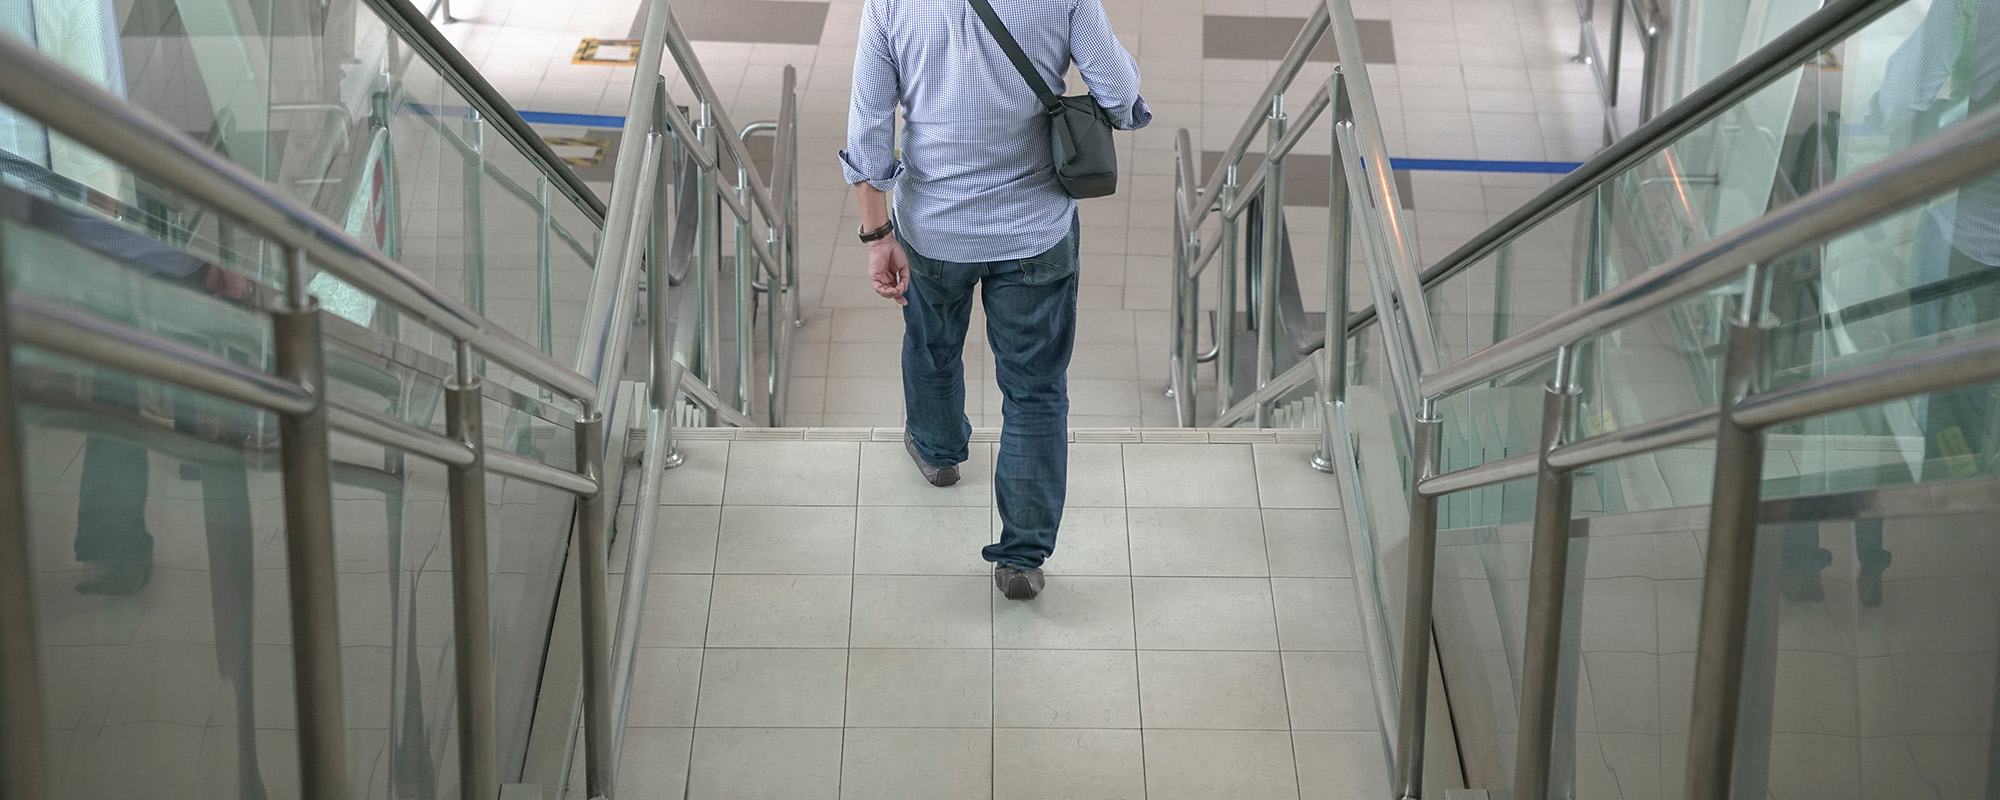 man walking down the stairs inside a subway building.